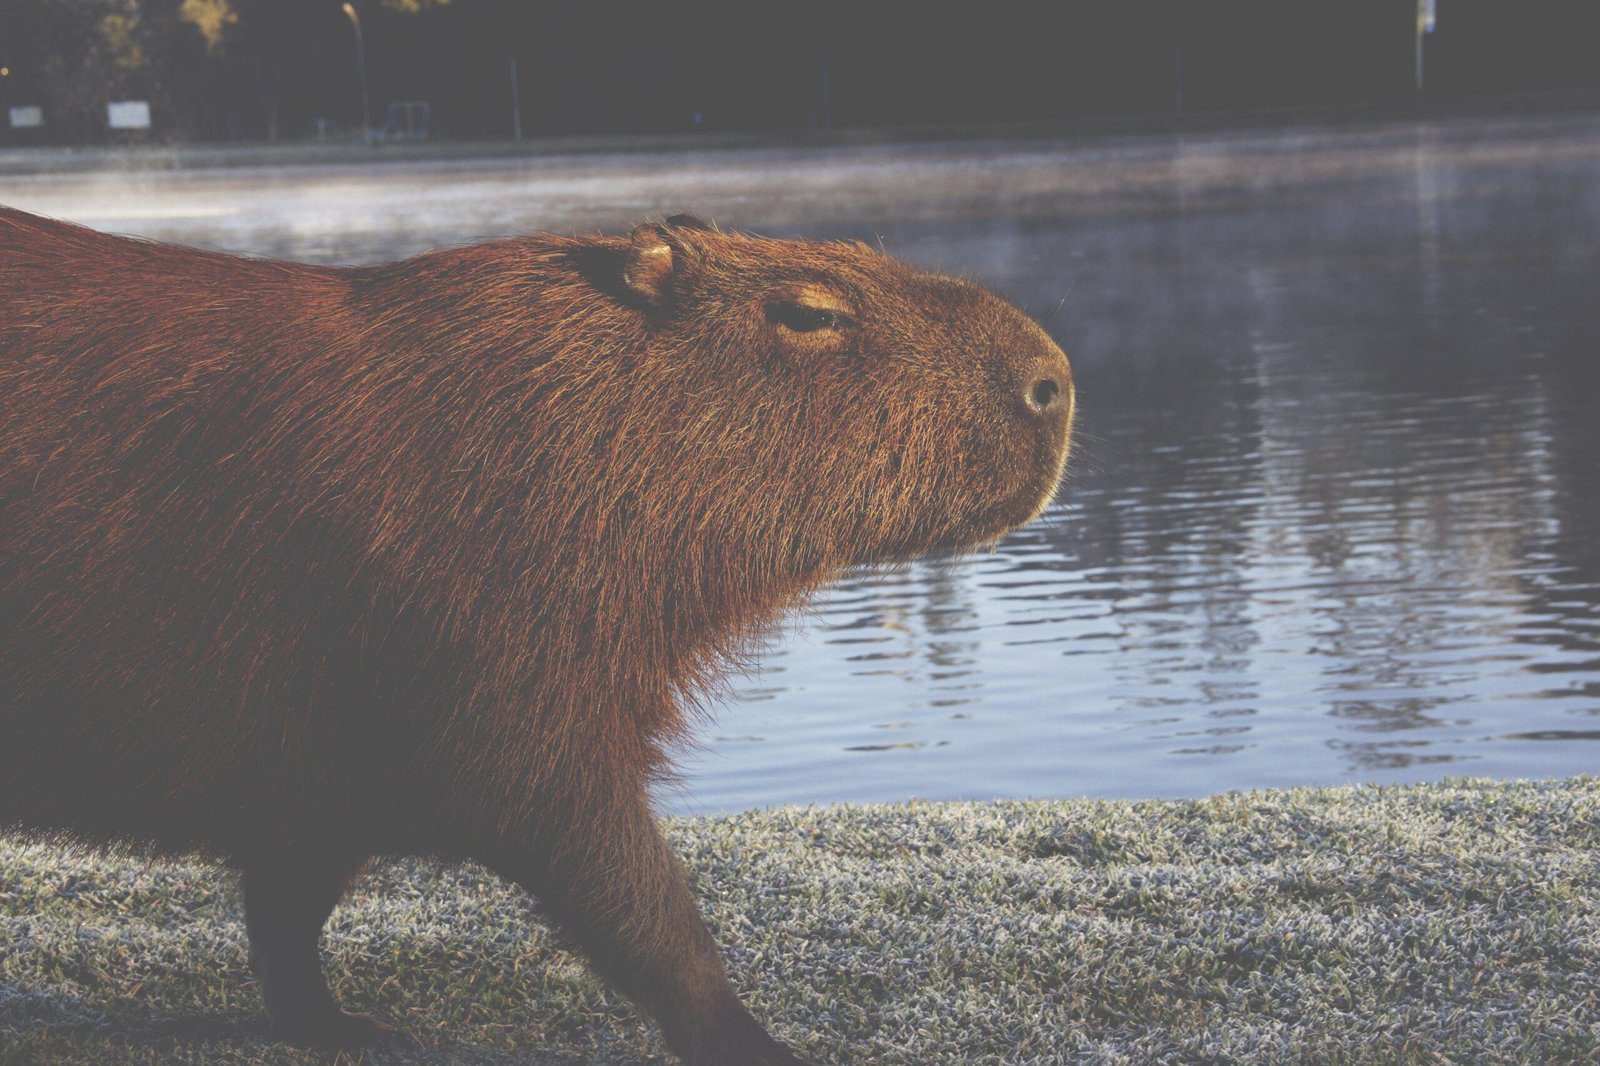 Why do people eat capybaras?